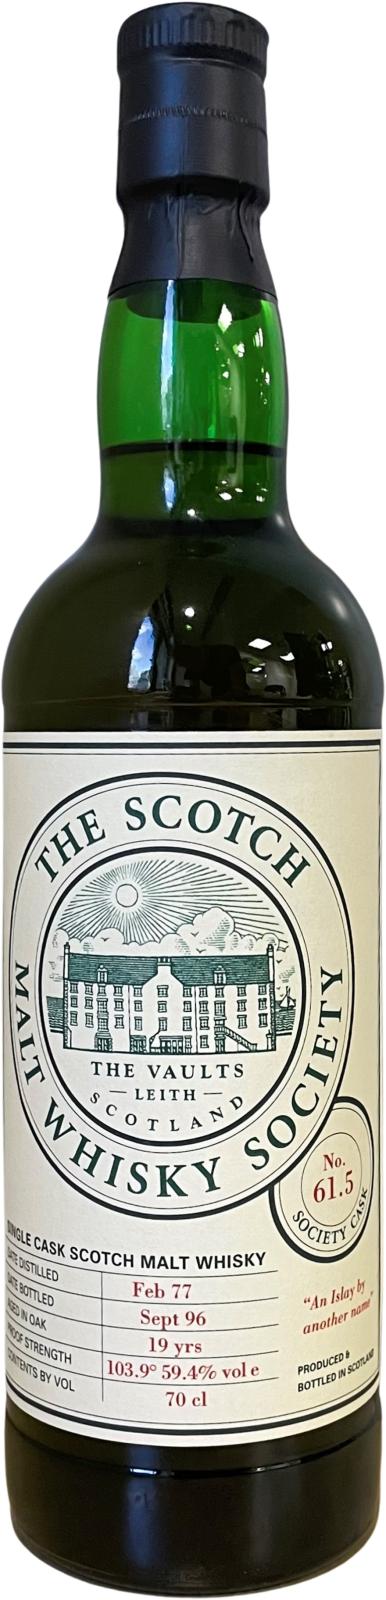 Brora 1977 SMWS 61.5 An Islay by another name 61.5 59.4% 700ml